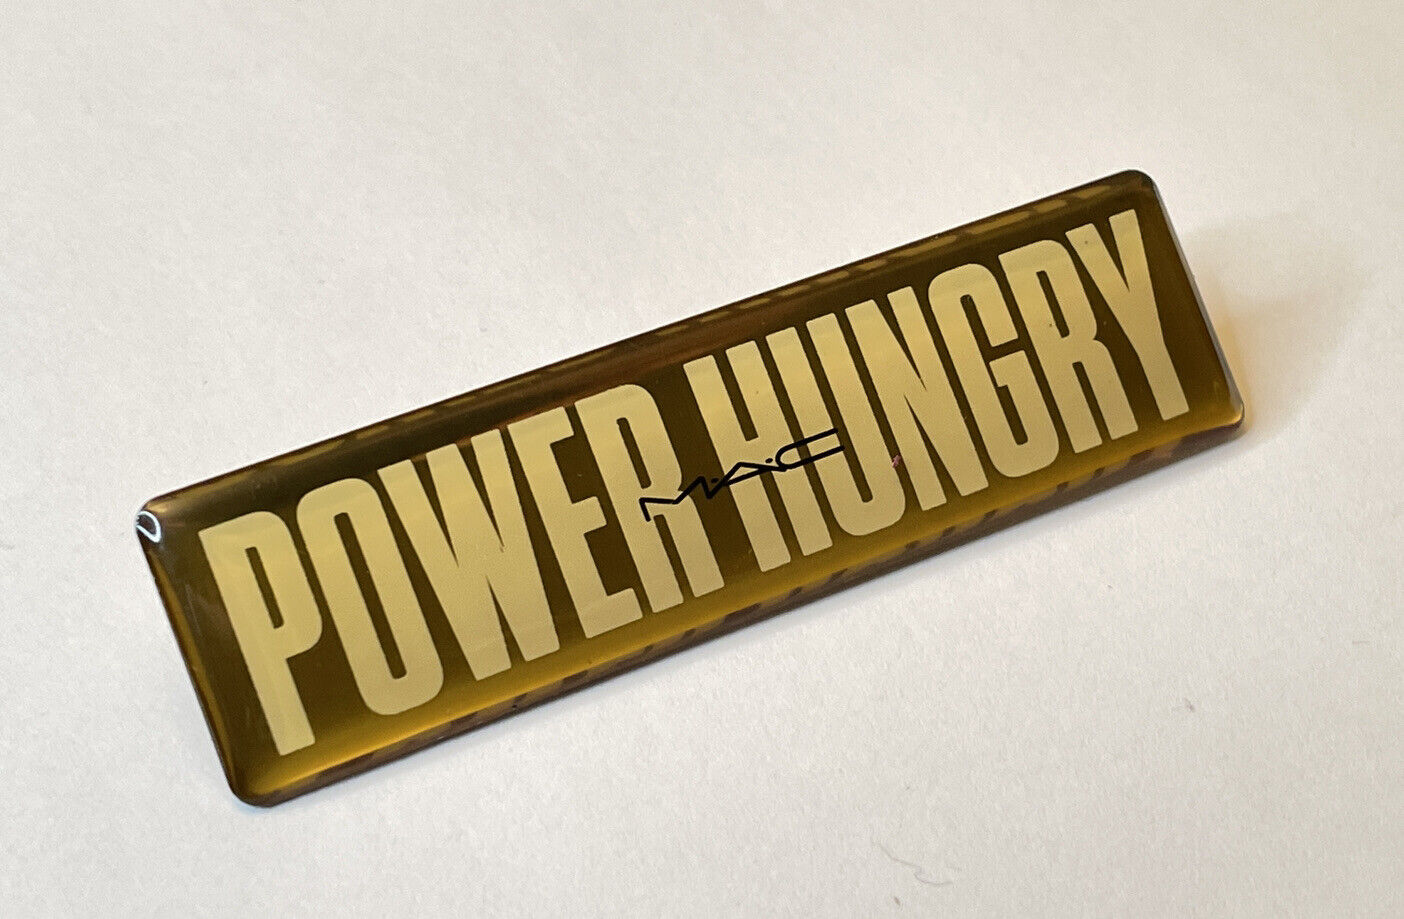 MAC Cosmetics Power Hungry Pin - In- Store Promo Badge Brooch